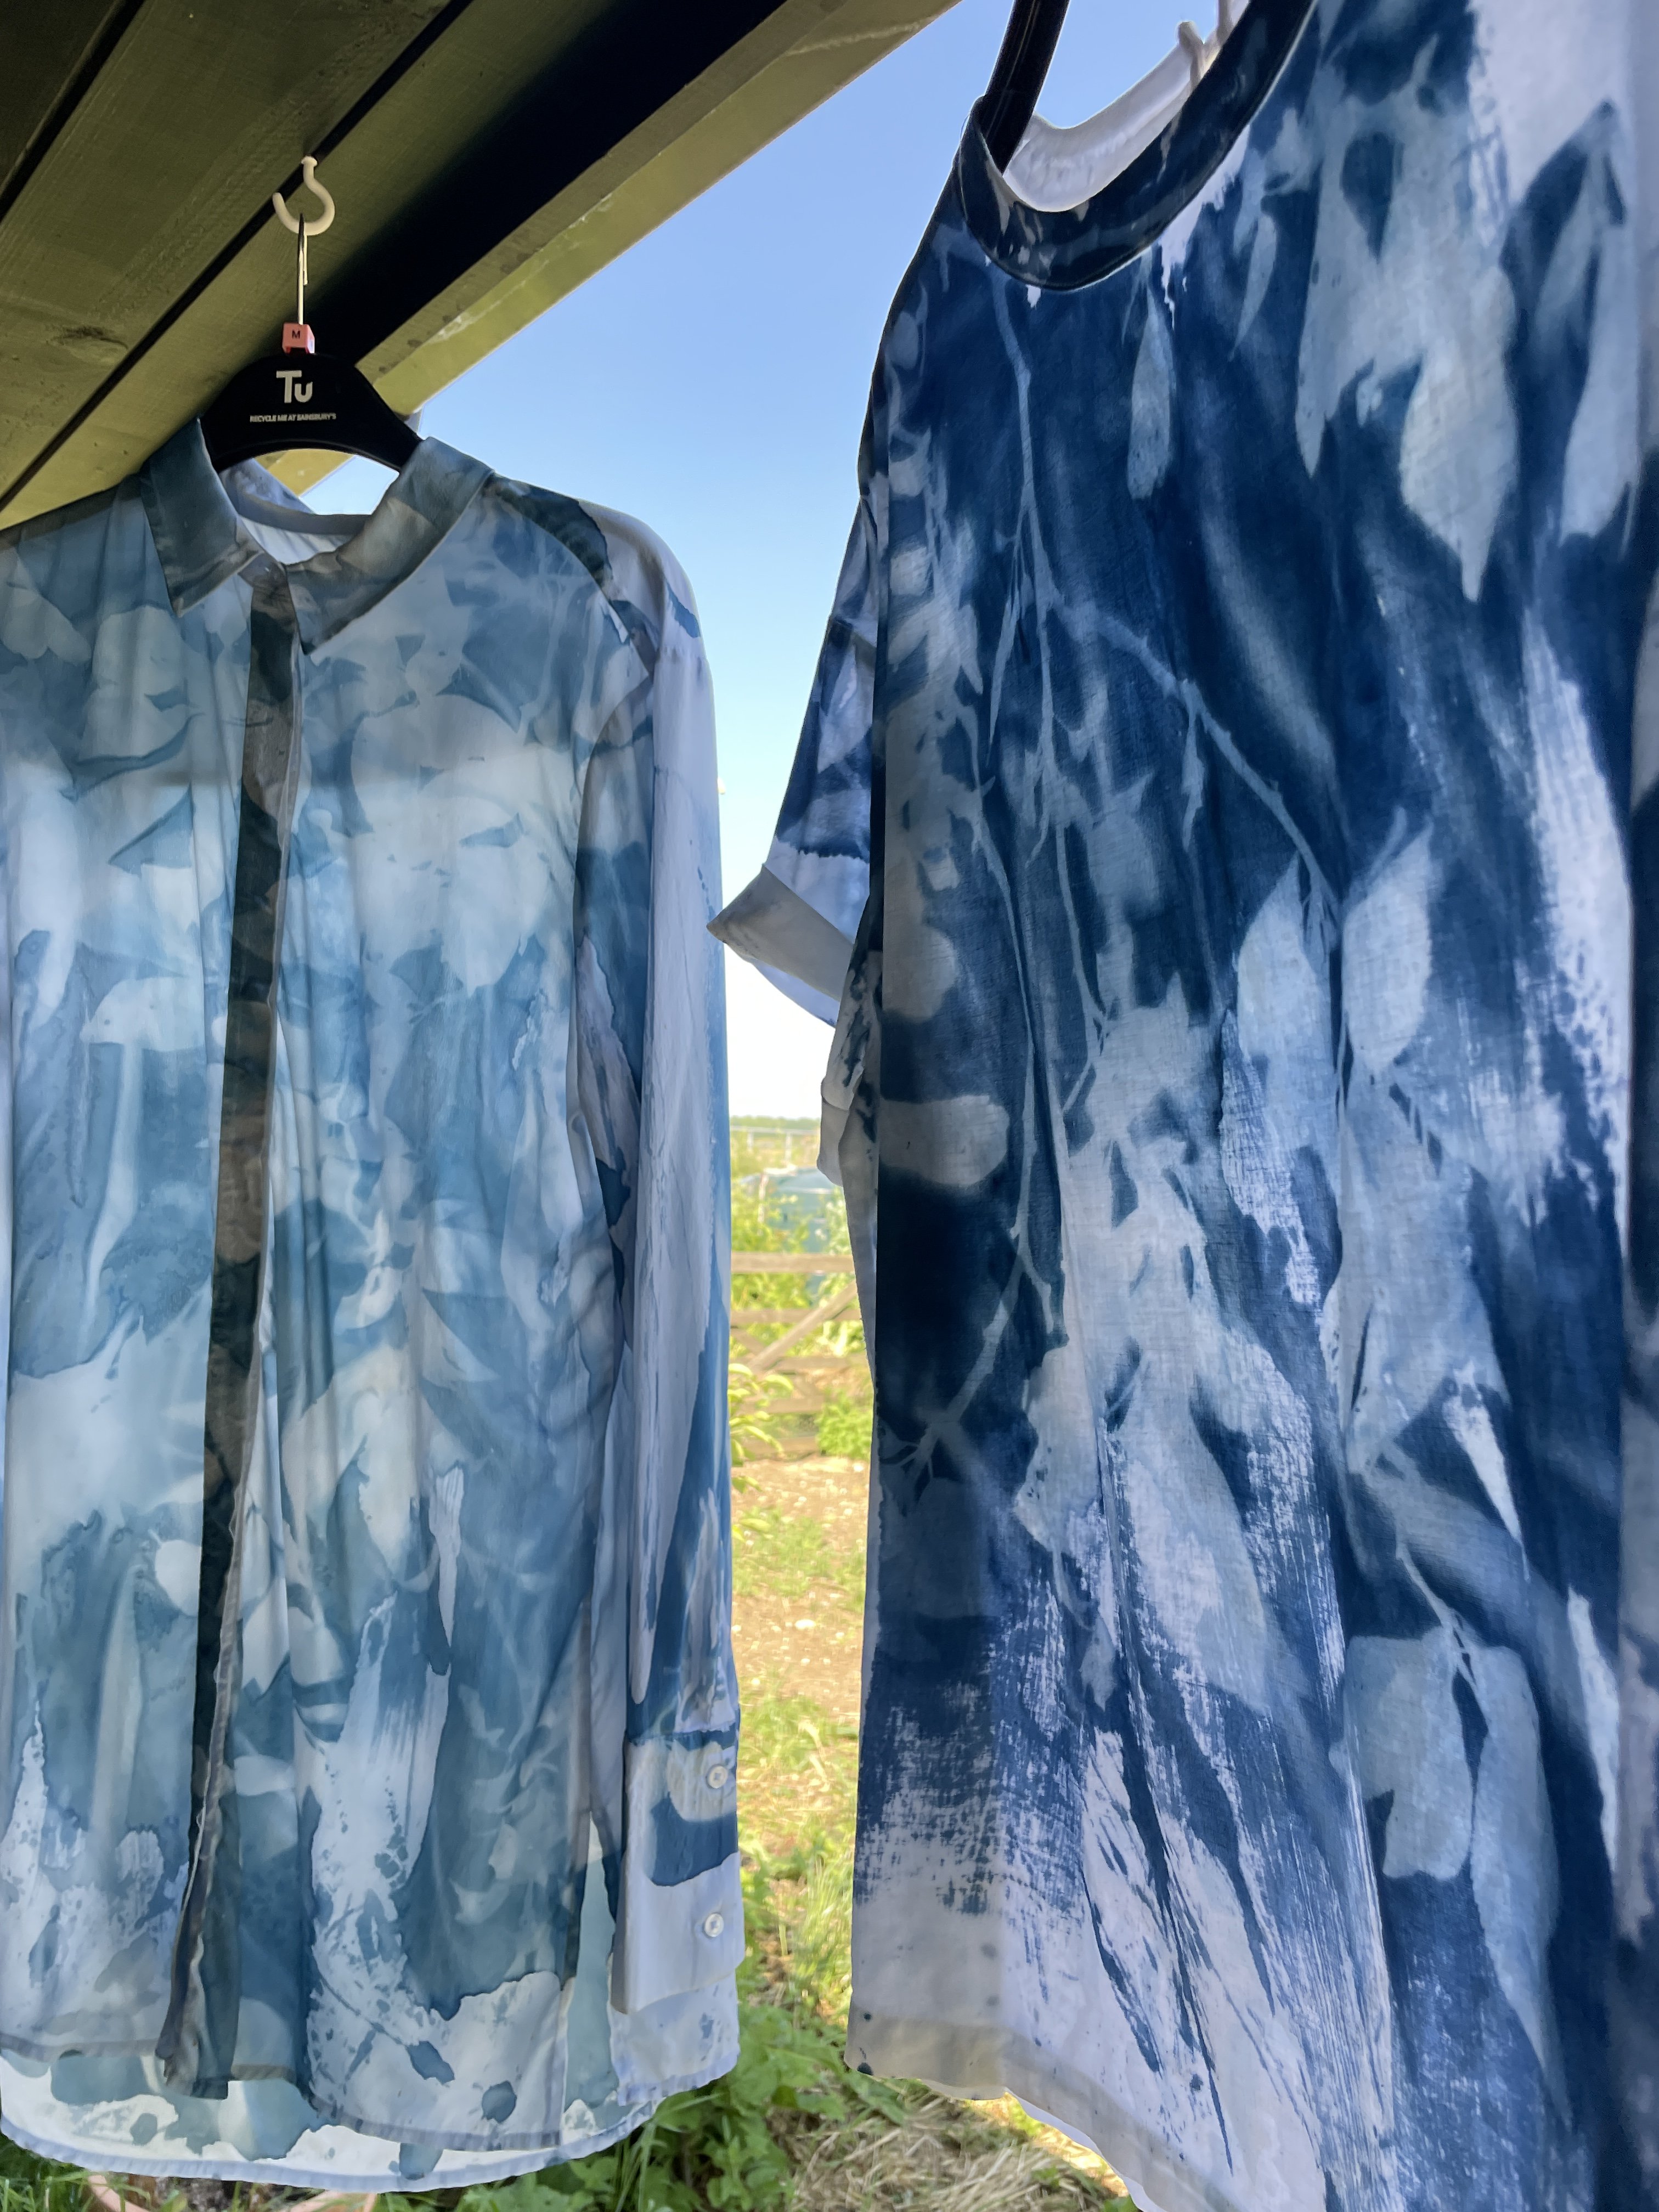 Artful Cyanotypes - Cyanotypes on fabric and playing with pattern